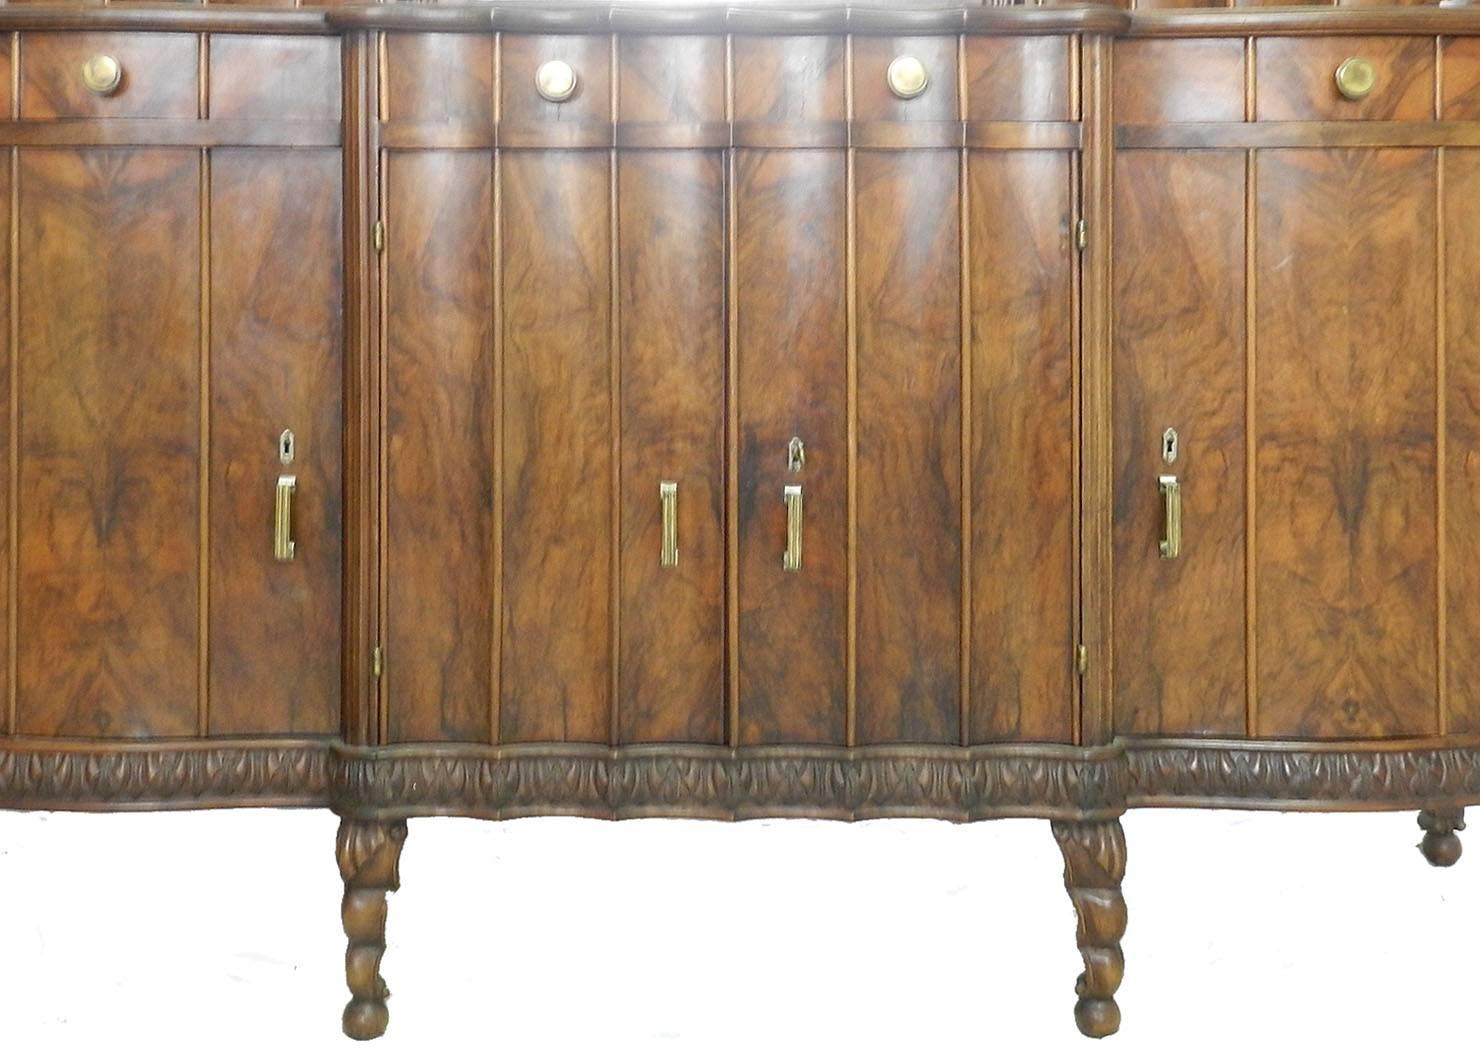 20th Century Credenza Sideboard Art Nouveau Art Deco Buffet Rare Find Hollywood Italian  For Sale